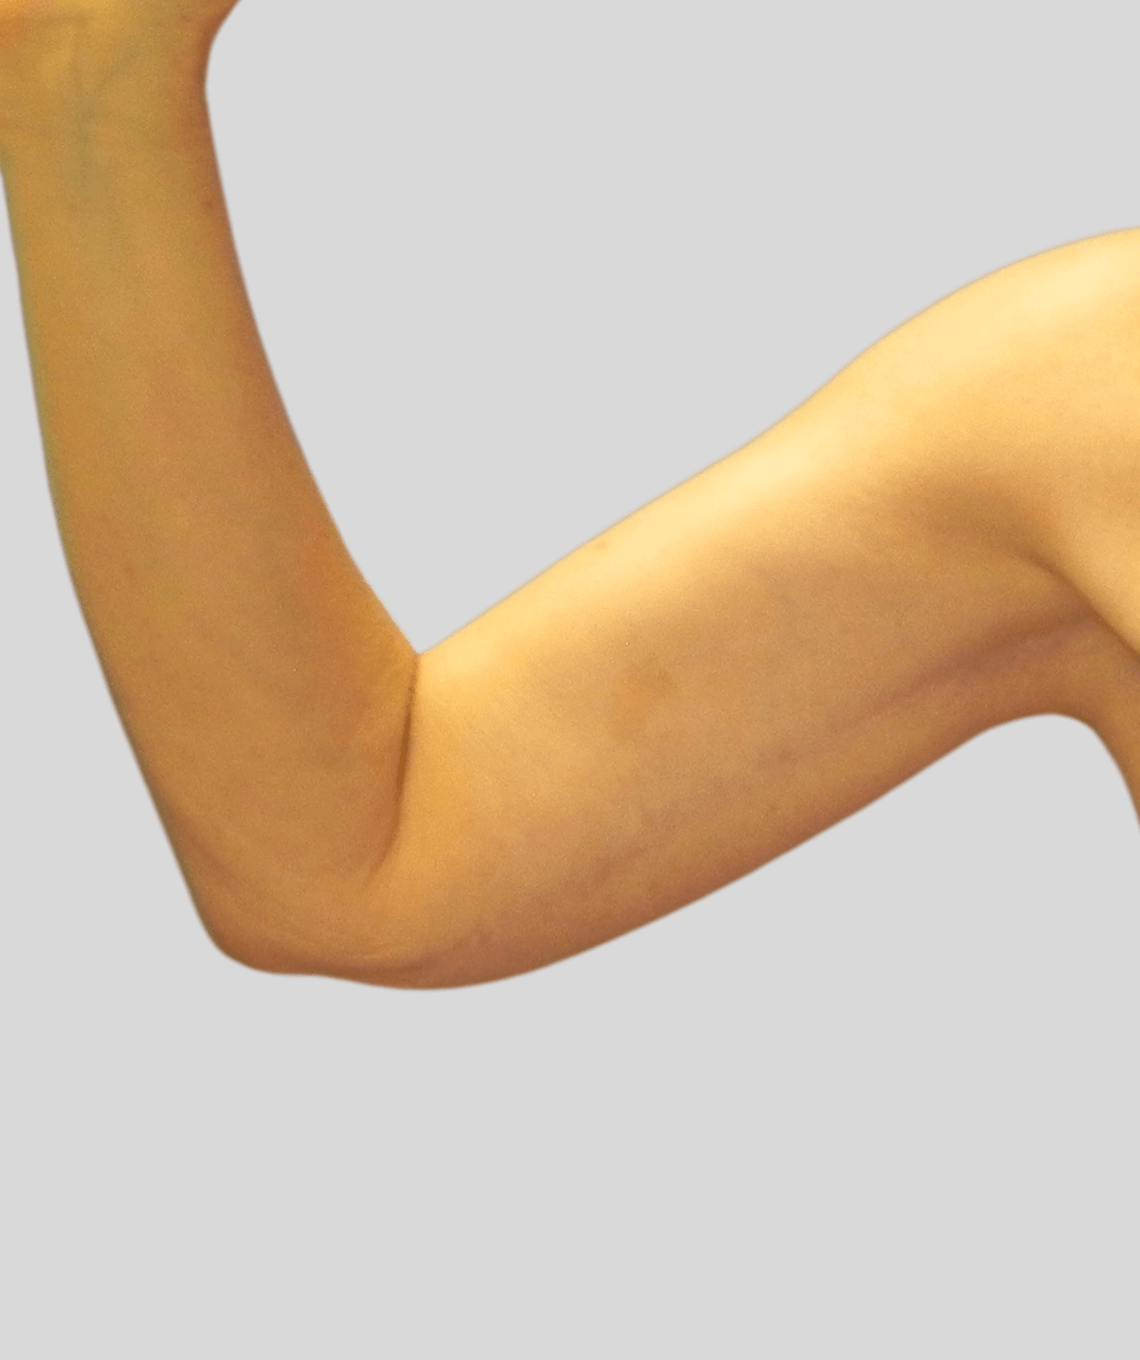 arm lift - before and after photos - after - prma plastic surgery - case 45